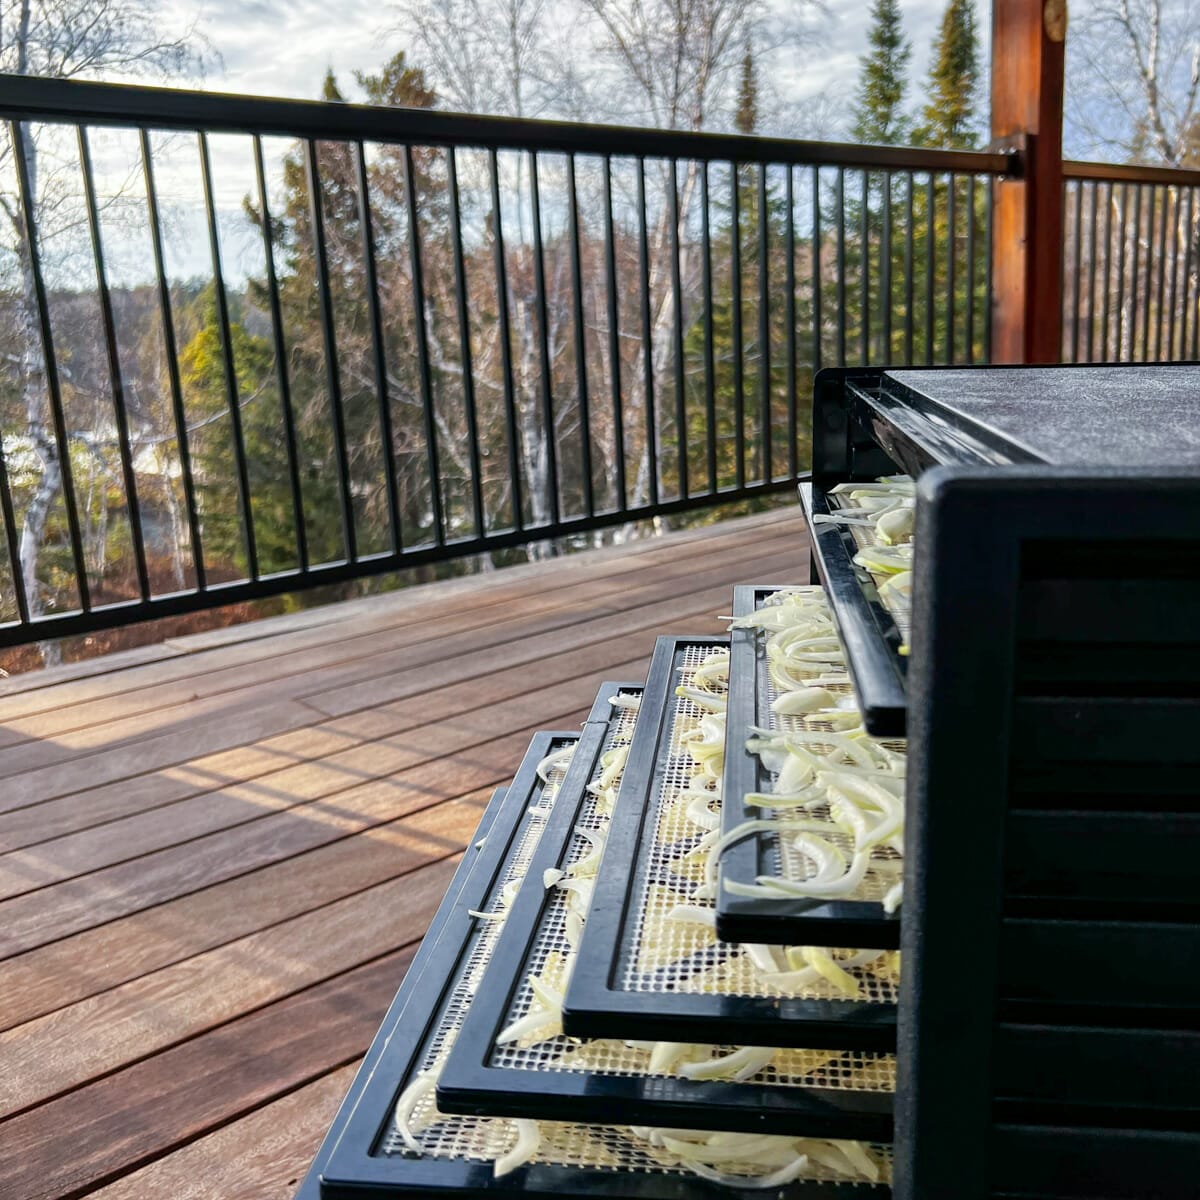 dehydrator with trays of onions on balcony overlooking trees 